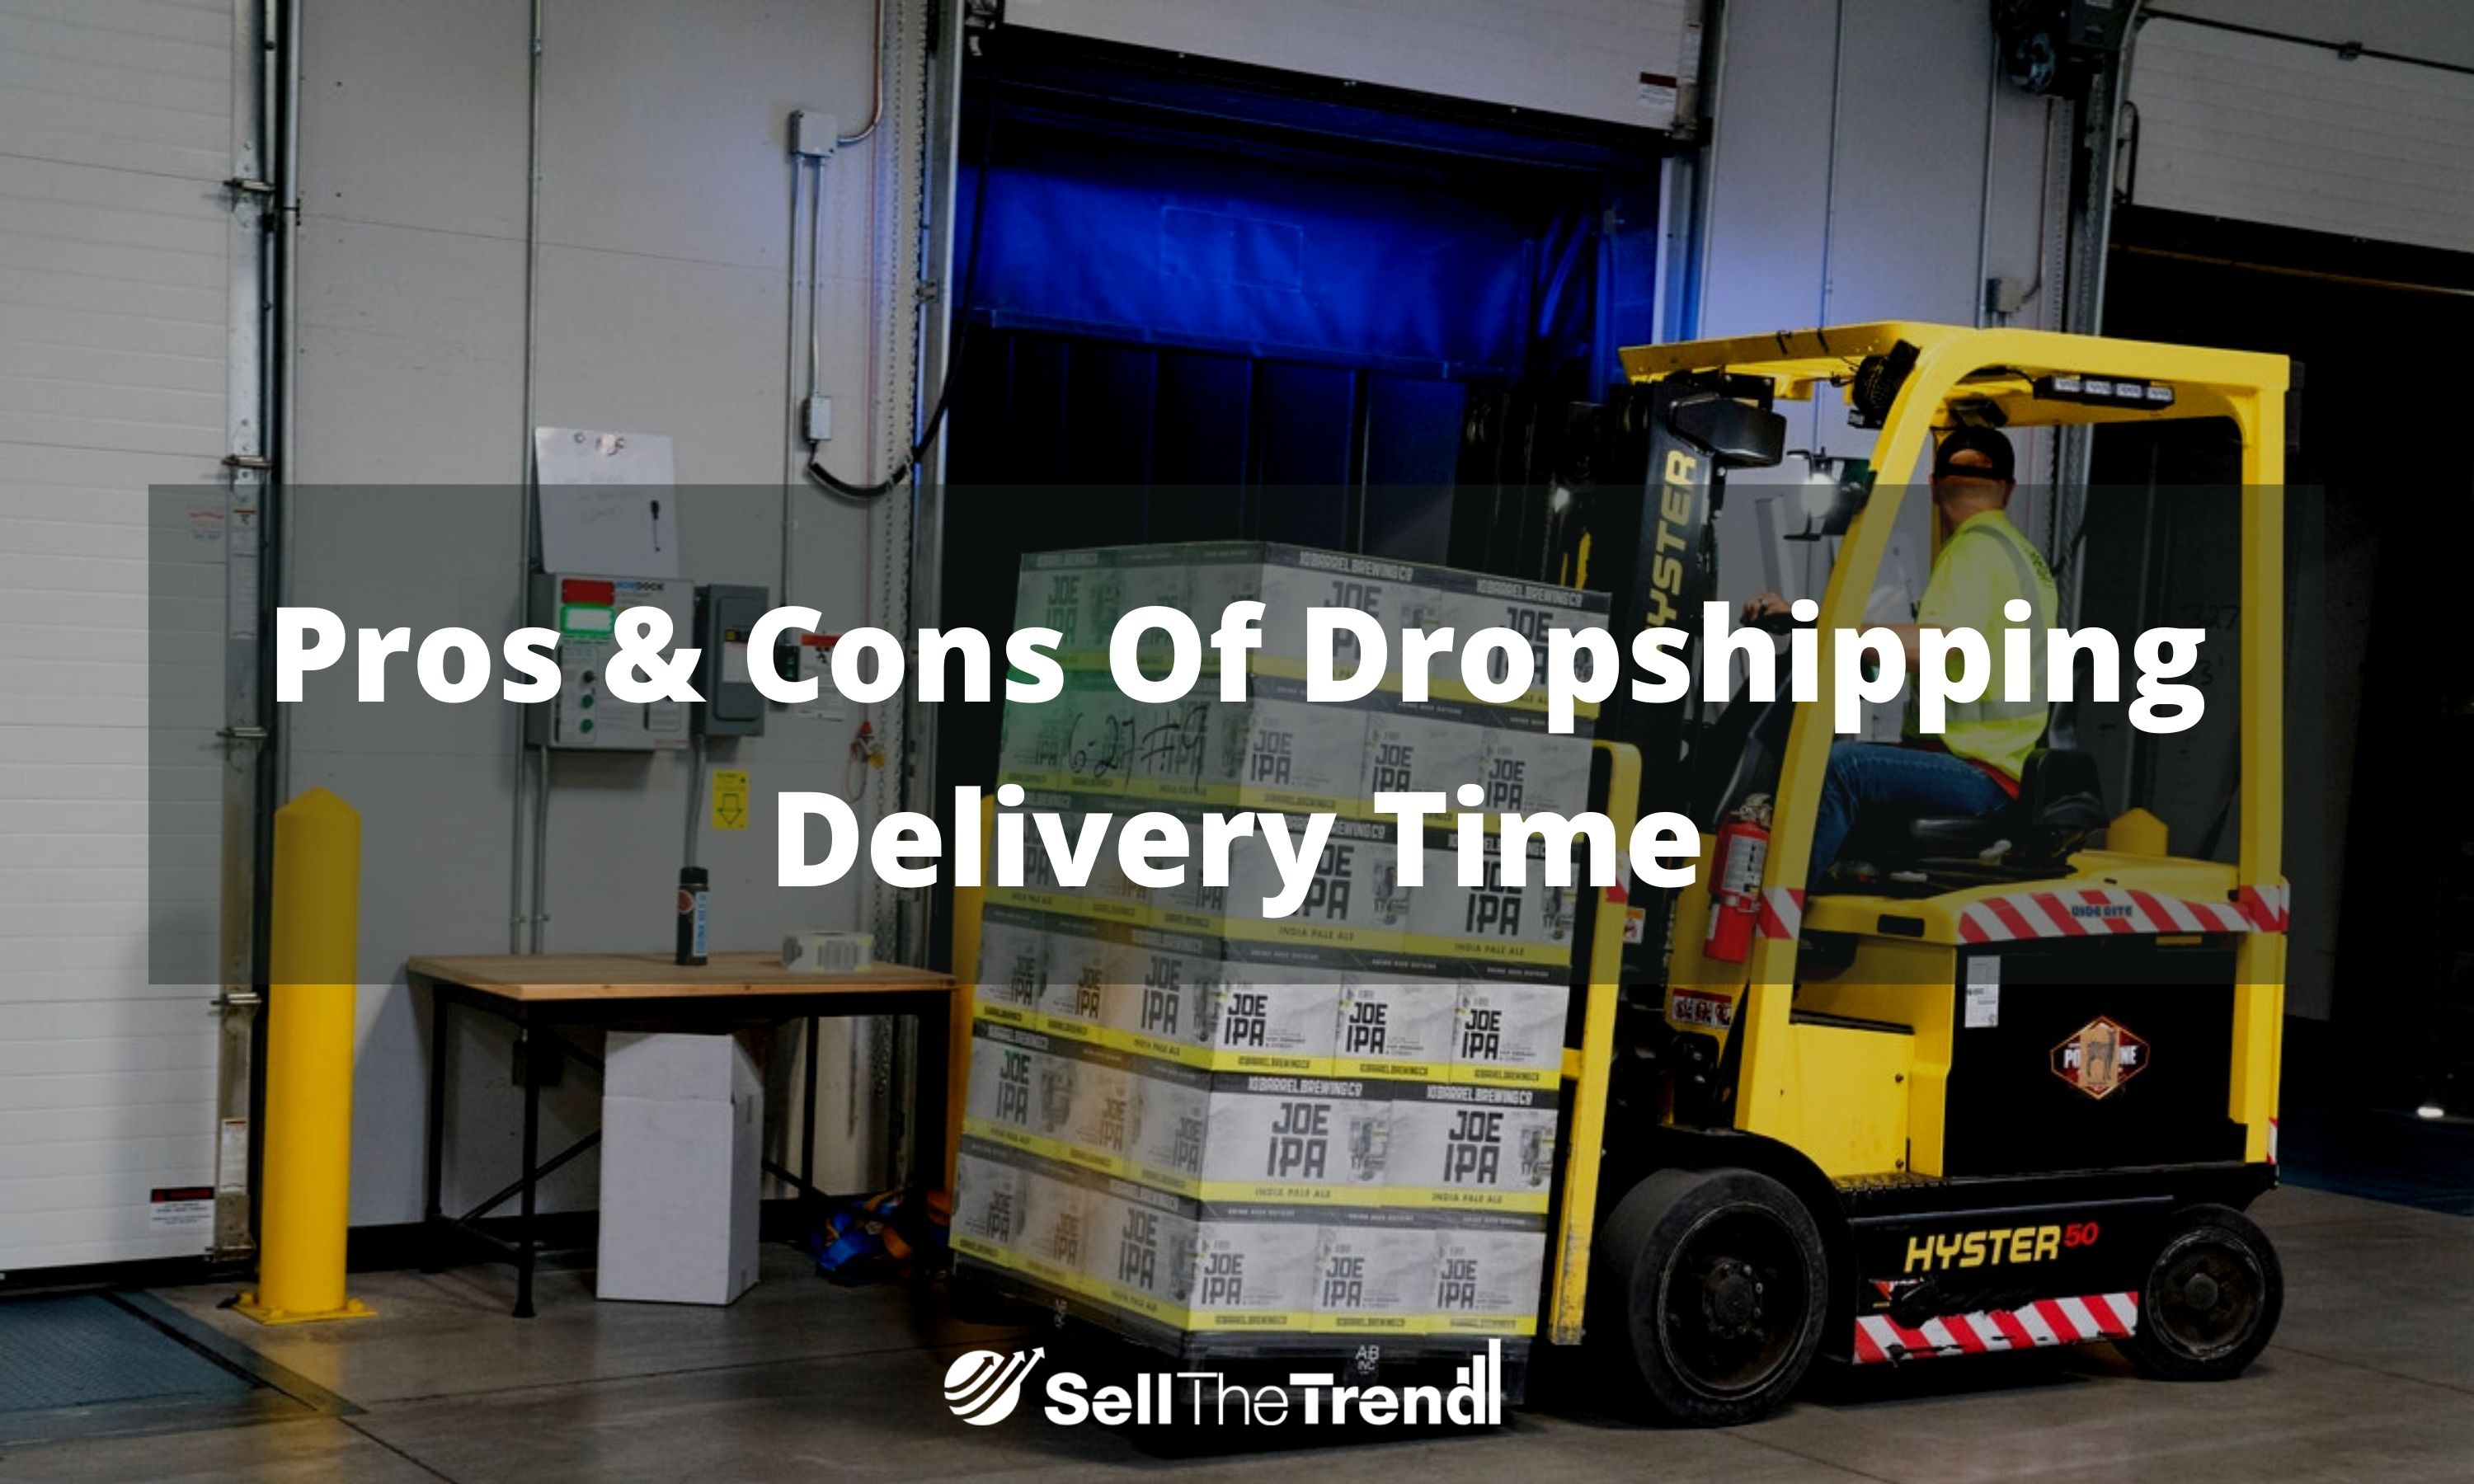 What to do about the dropshipping delivery time?